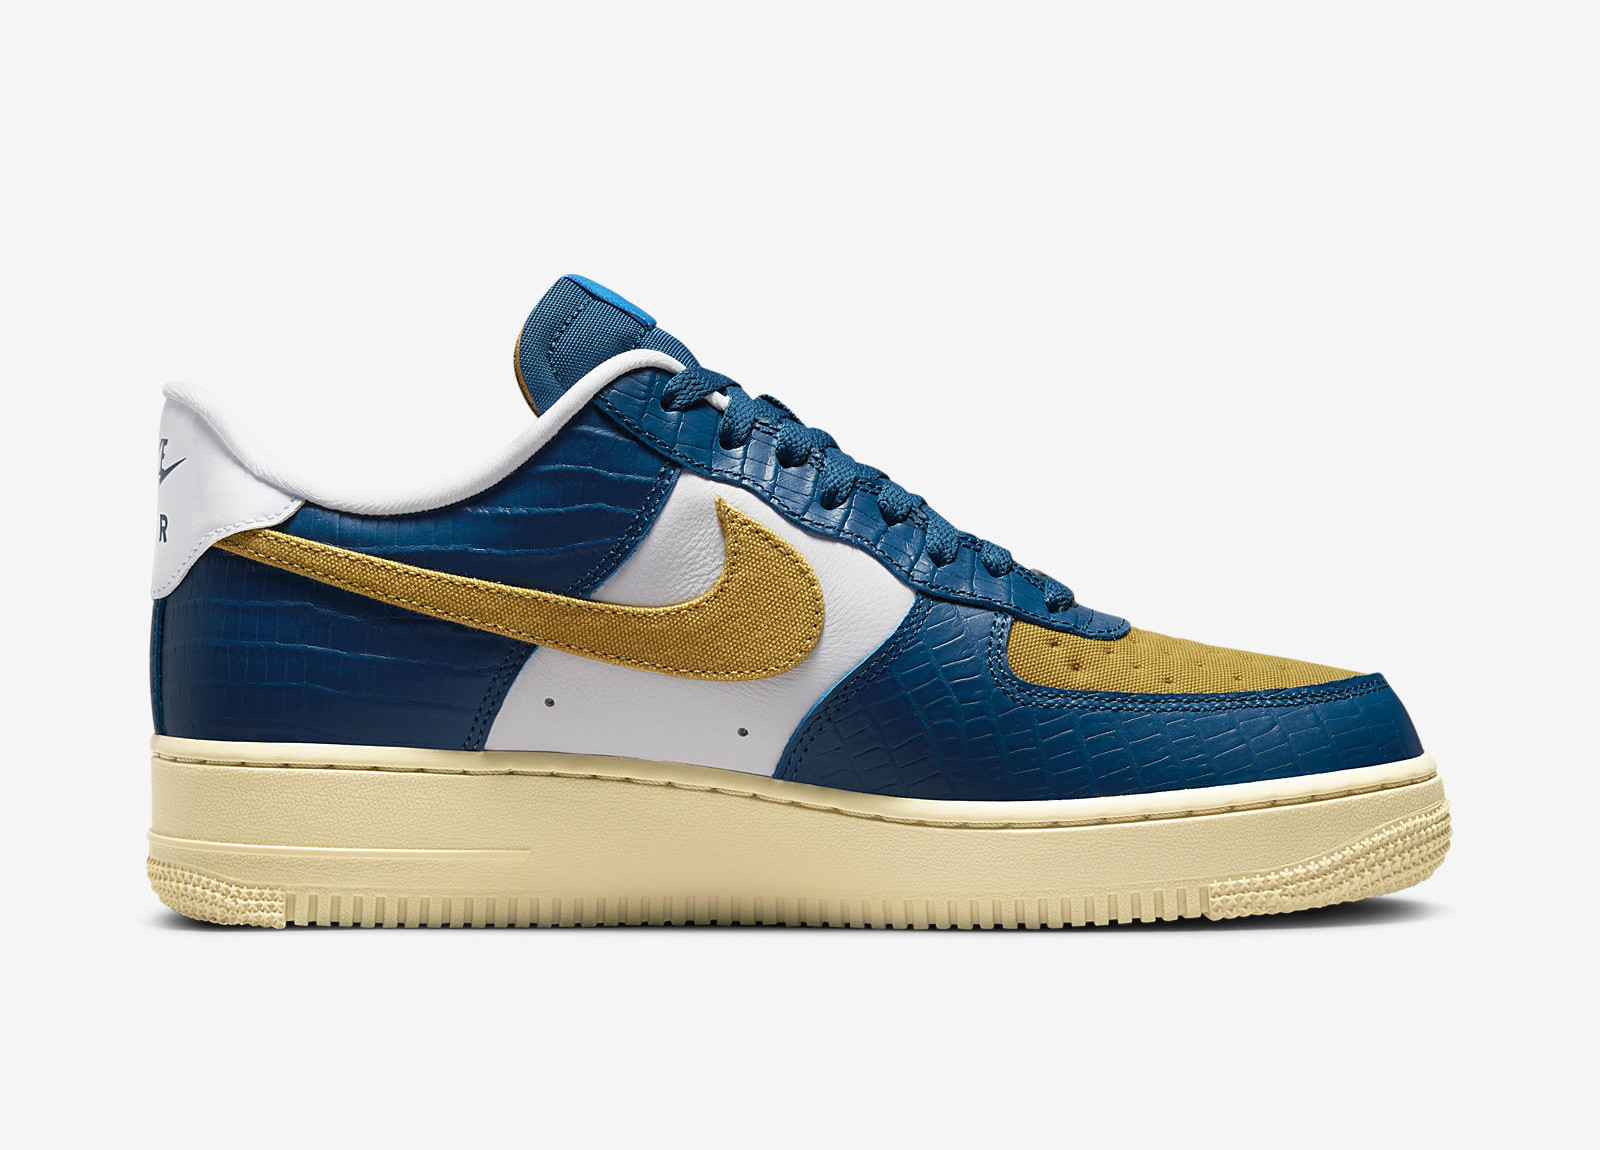 Undefeated x Nike
Air Force 1 Low
Blue / White / Goldtone